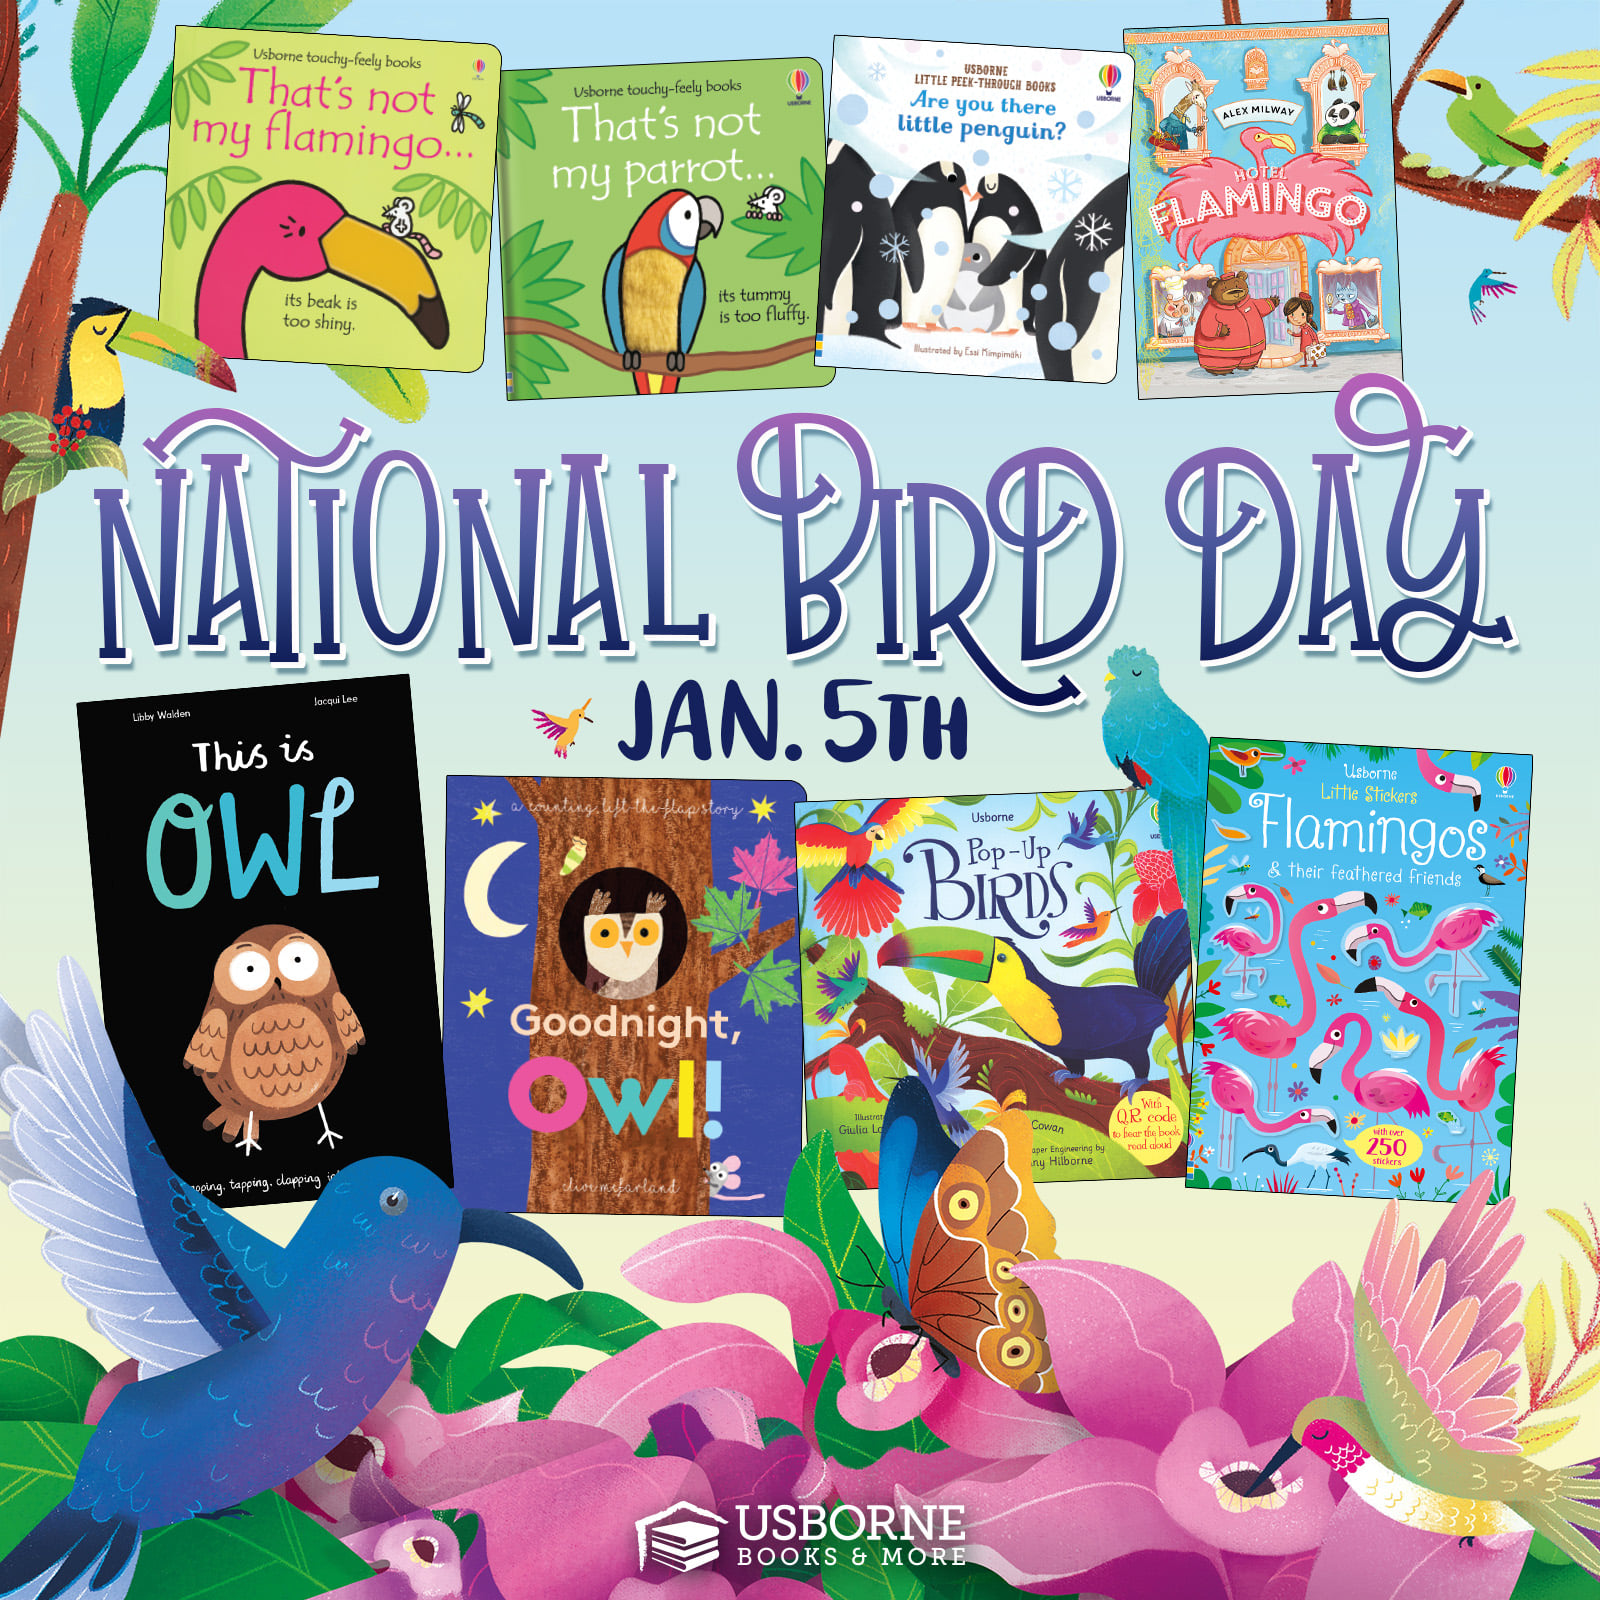 National Bird Day is January 5th.